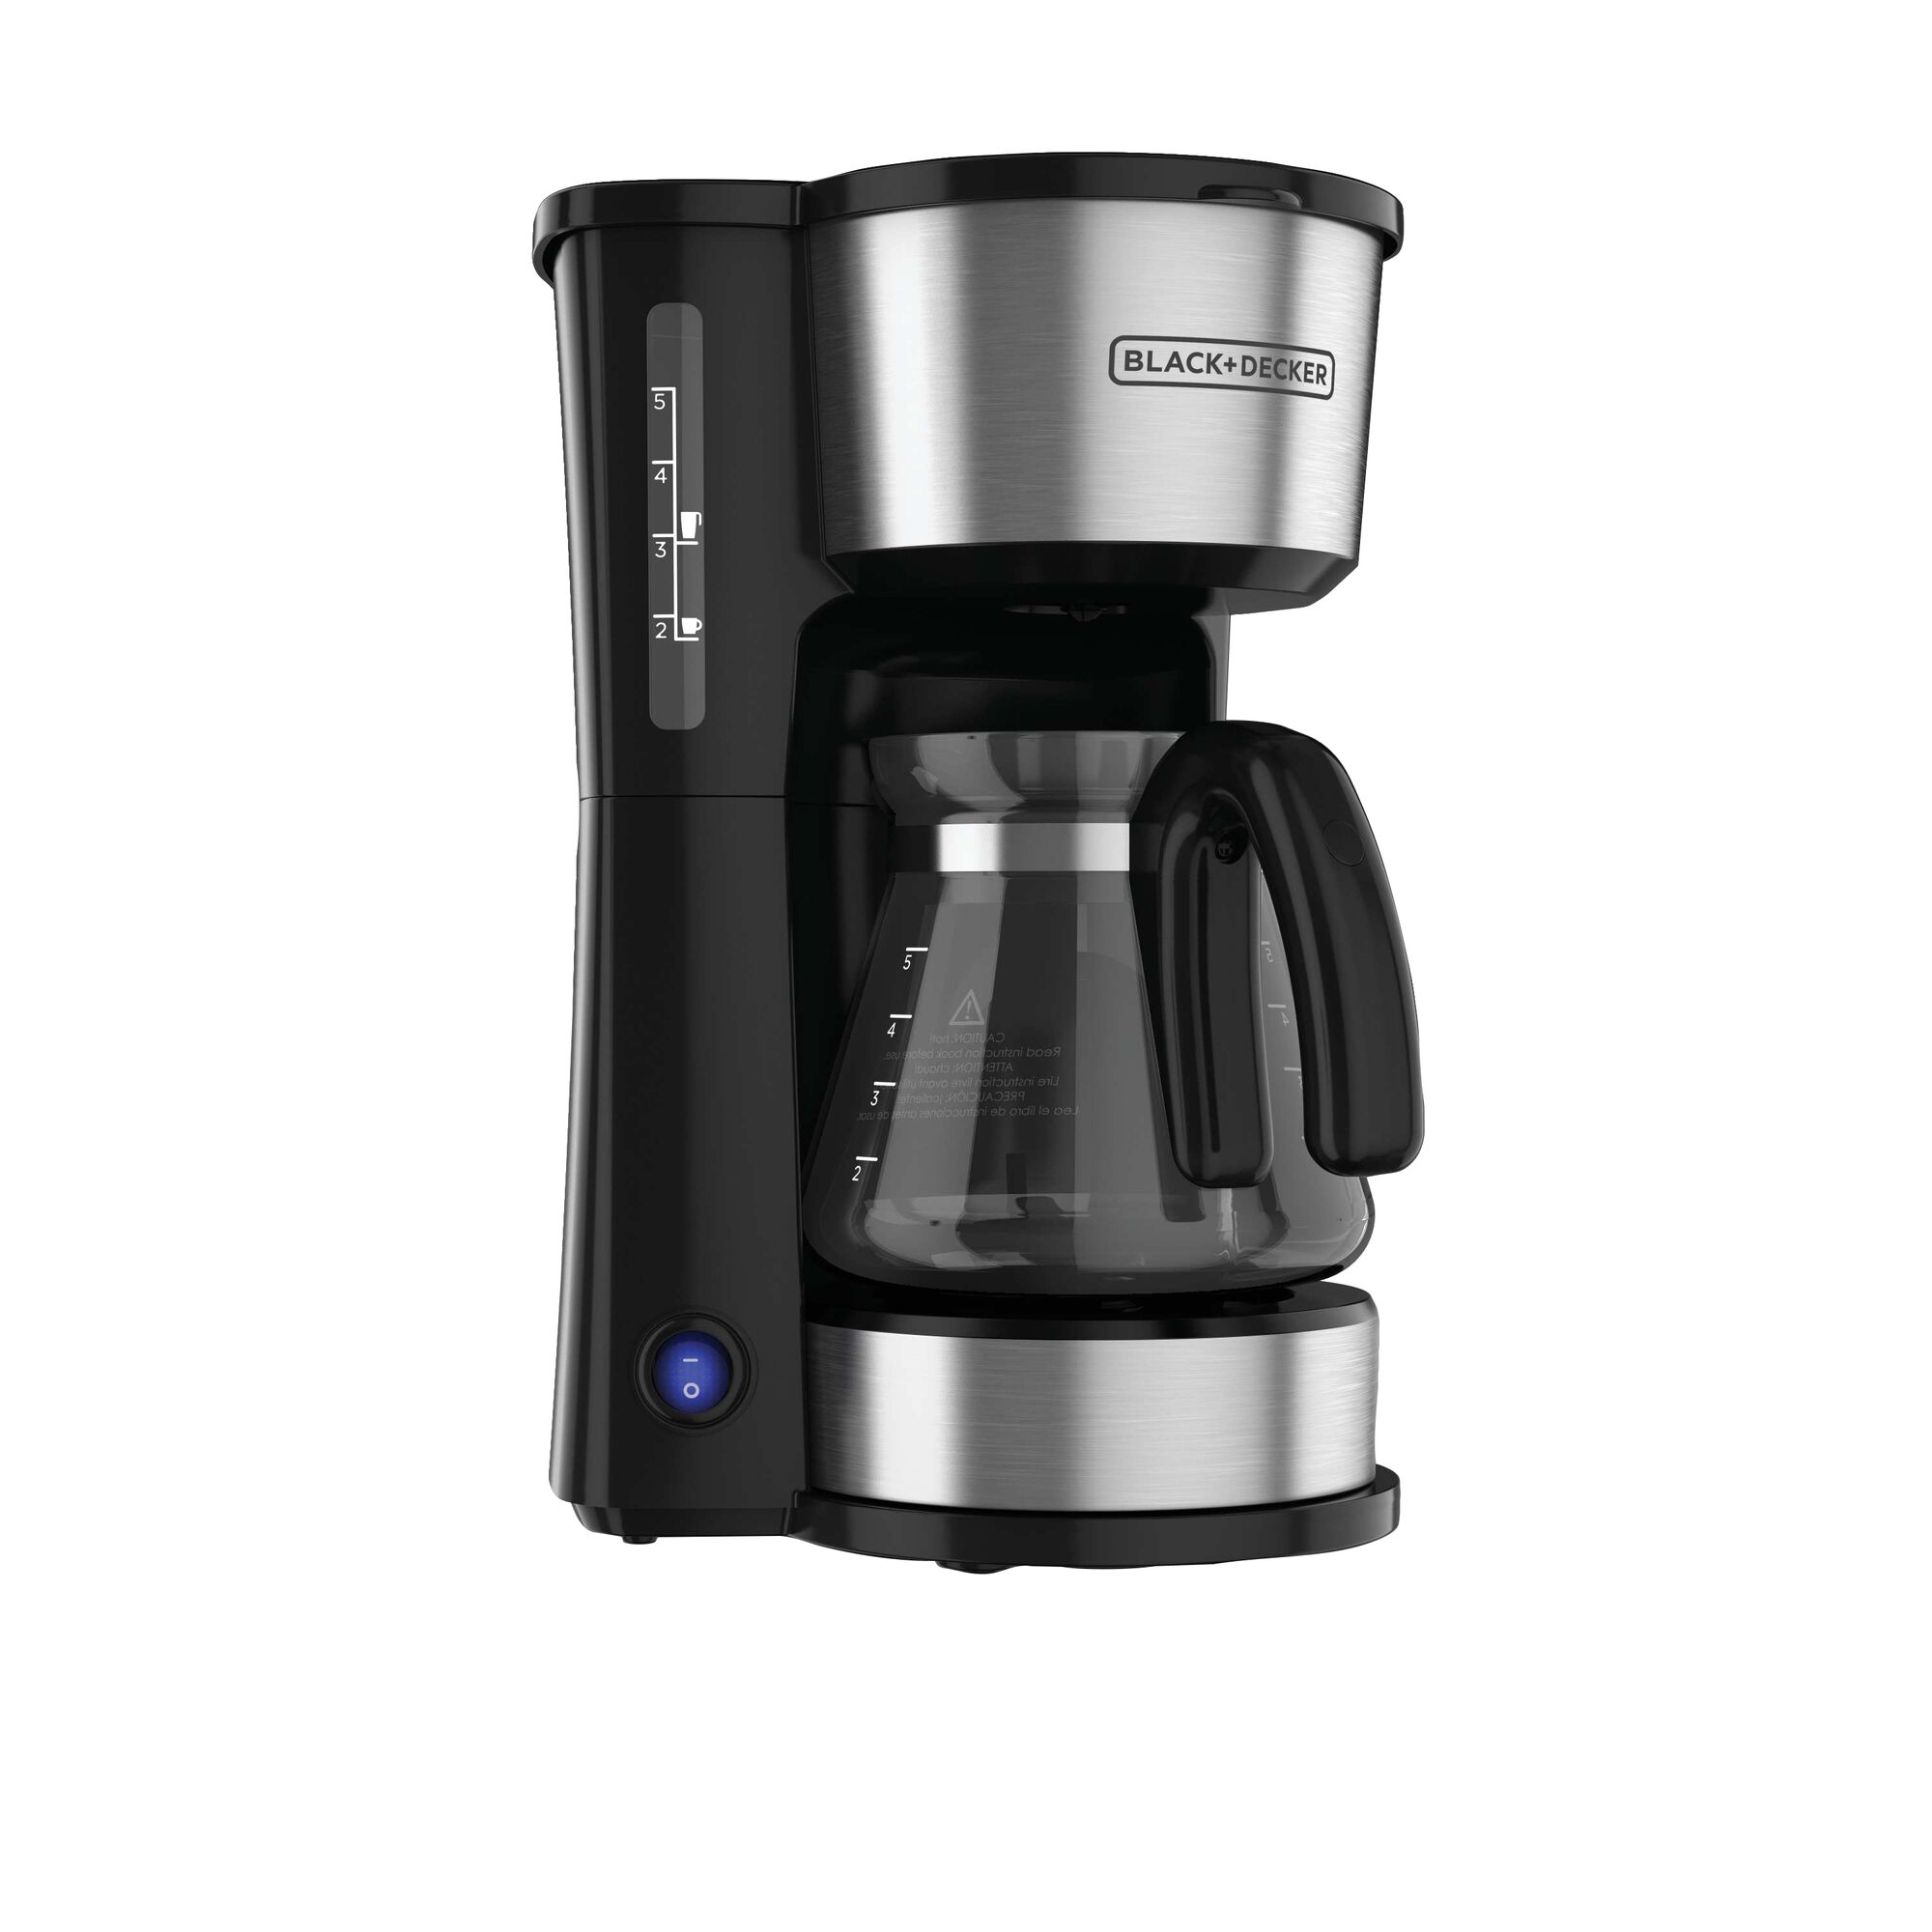 4 in 1 Coffee Station Coffee Maker.